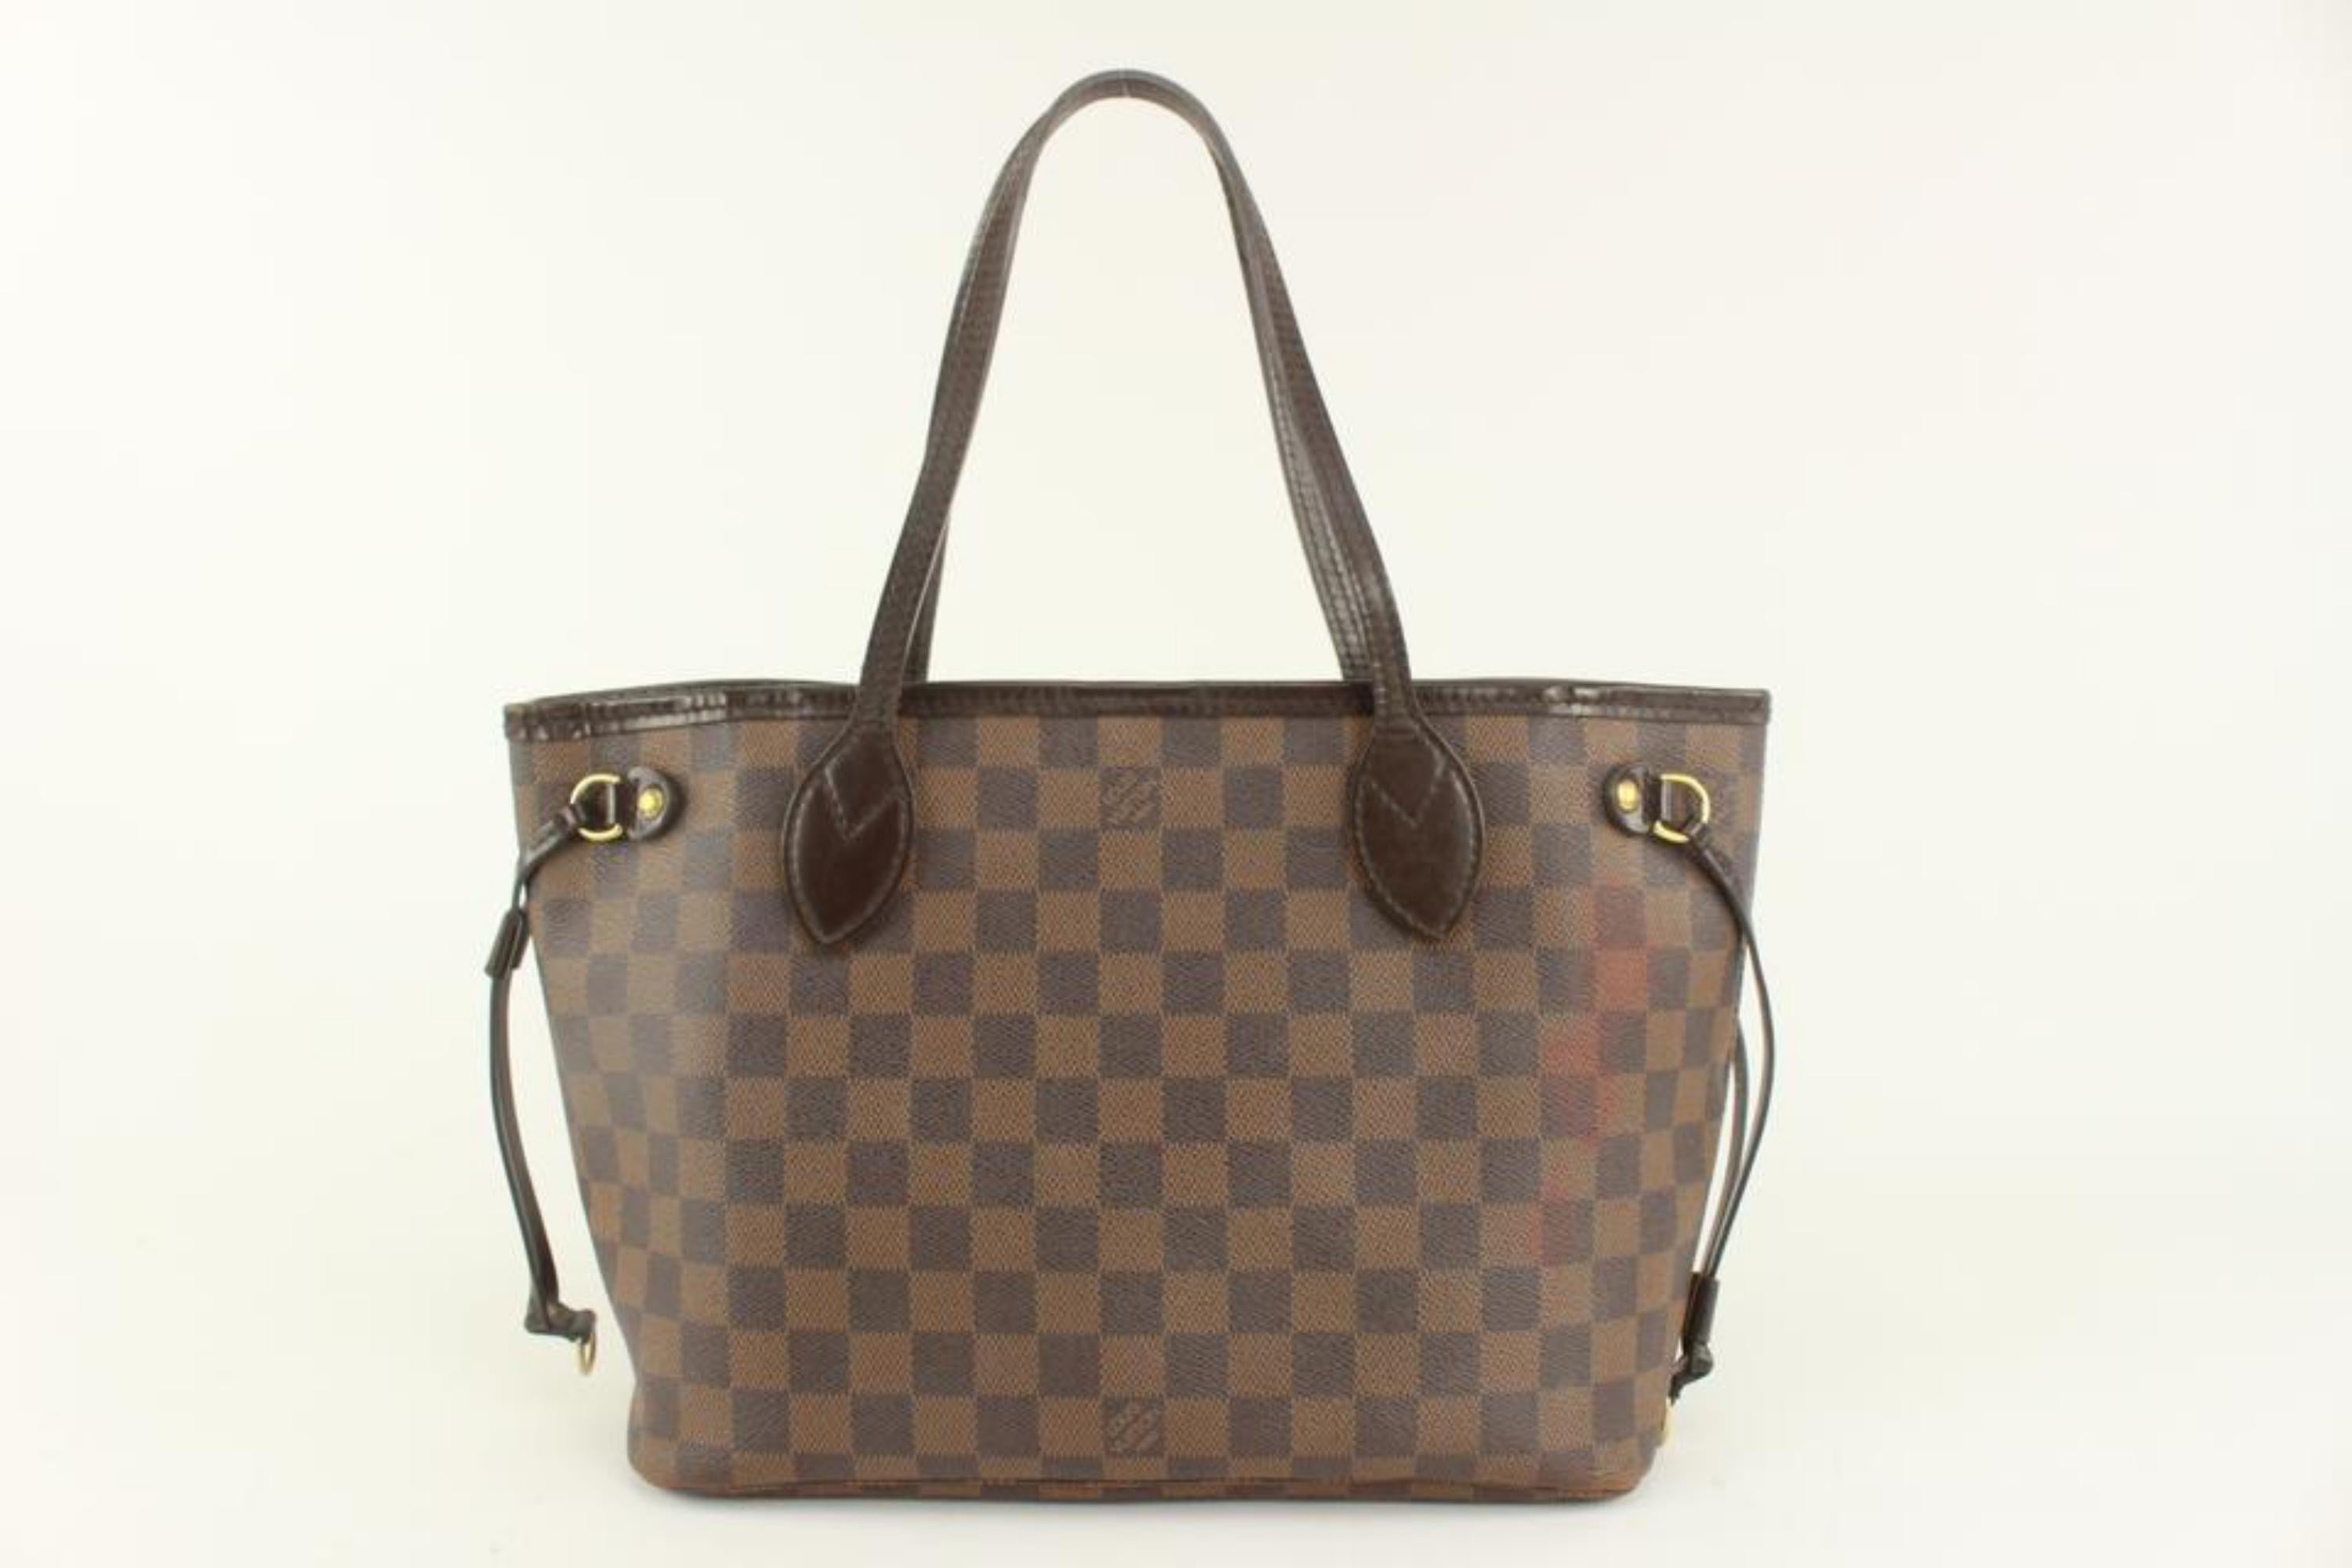 Louis Vuitton Small Damier Ebene Neverfull PM Tote Bag 123lv23 In Fair Condition For Sale In Dix hills, NY